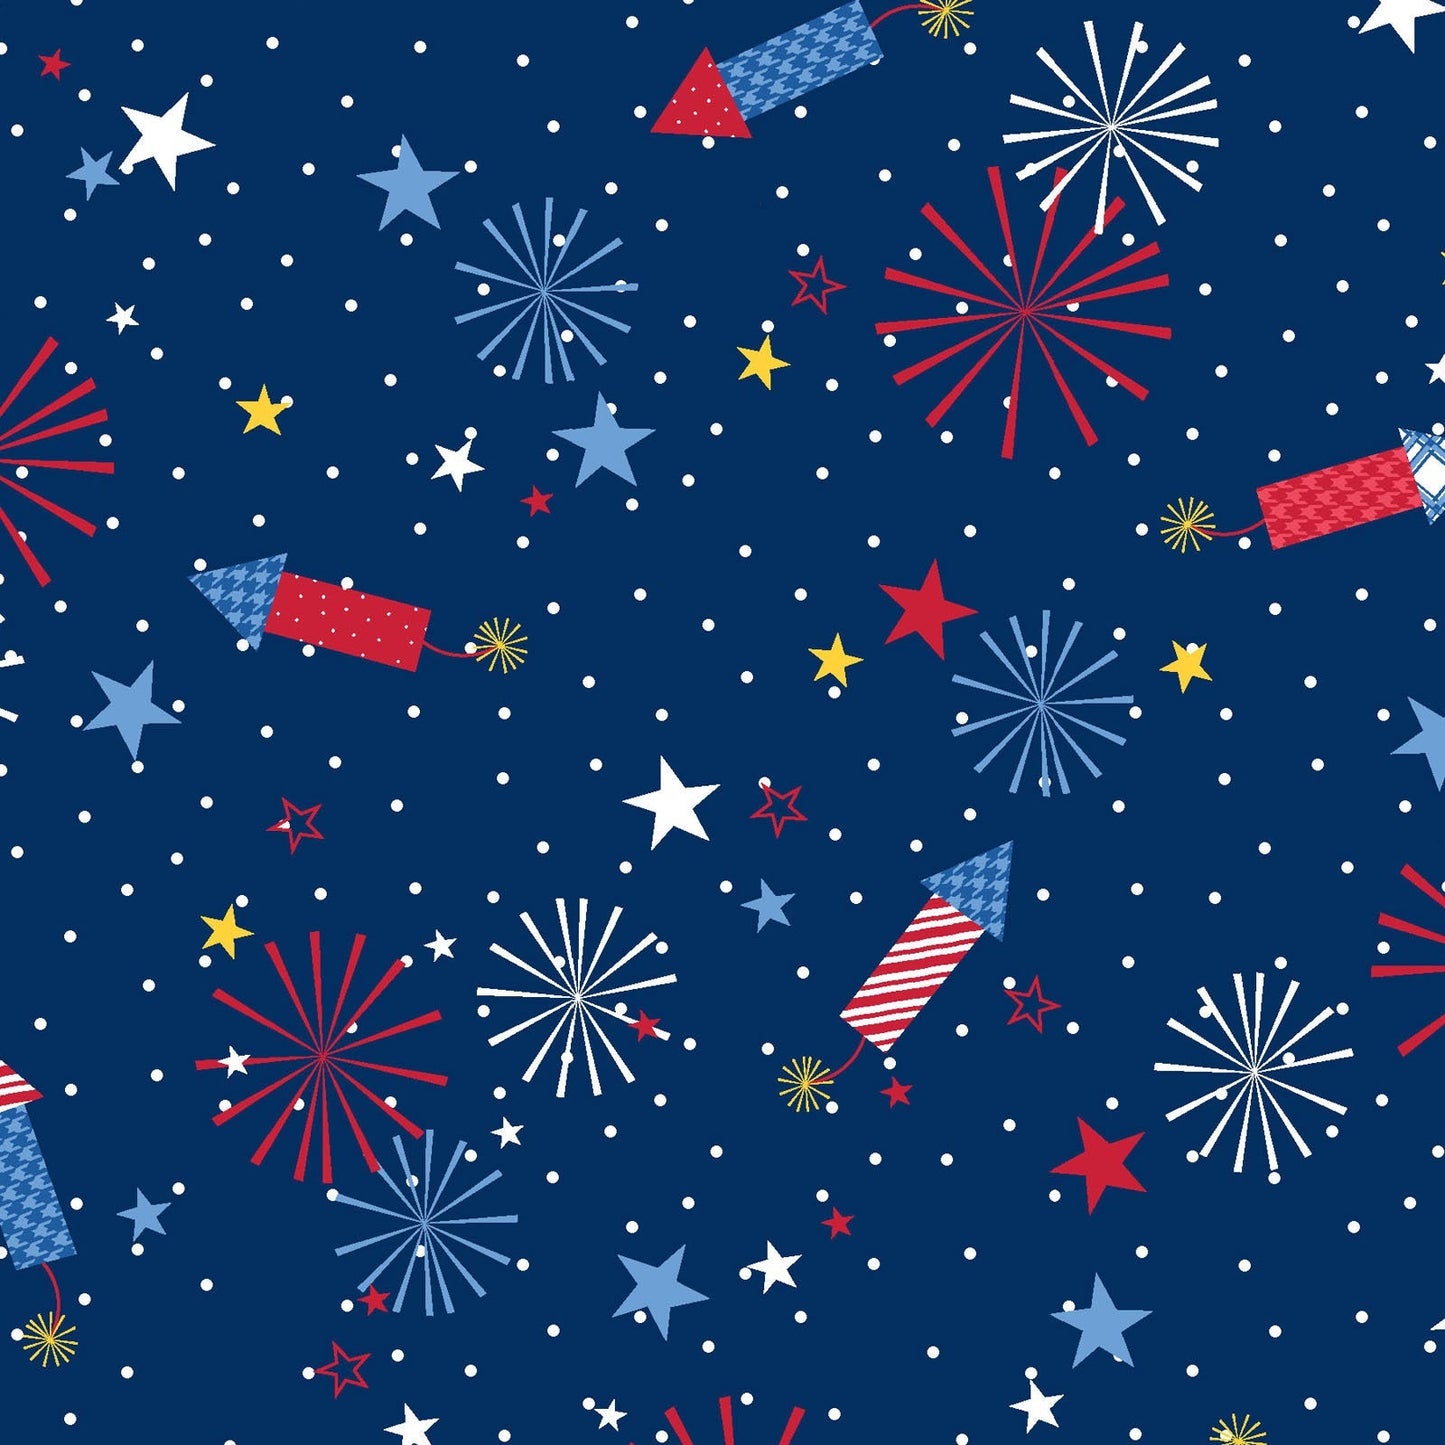 Fireworks on Navy Blue features rockets, fireworks and stars on a background of navy blue. It has a multi-directional layout so it can be used as a non-directional fabric. The fabric is from the Red, White & Bloom collection by Kim Christopherson of Kimberbell for Maywood Studio and features everything to love about summer.